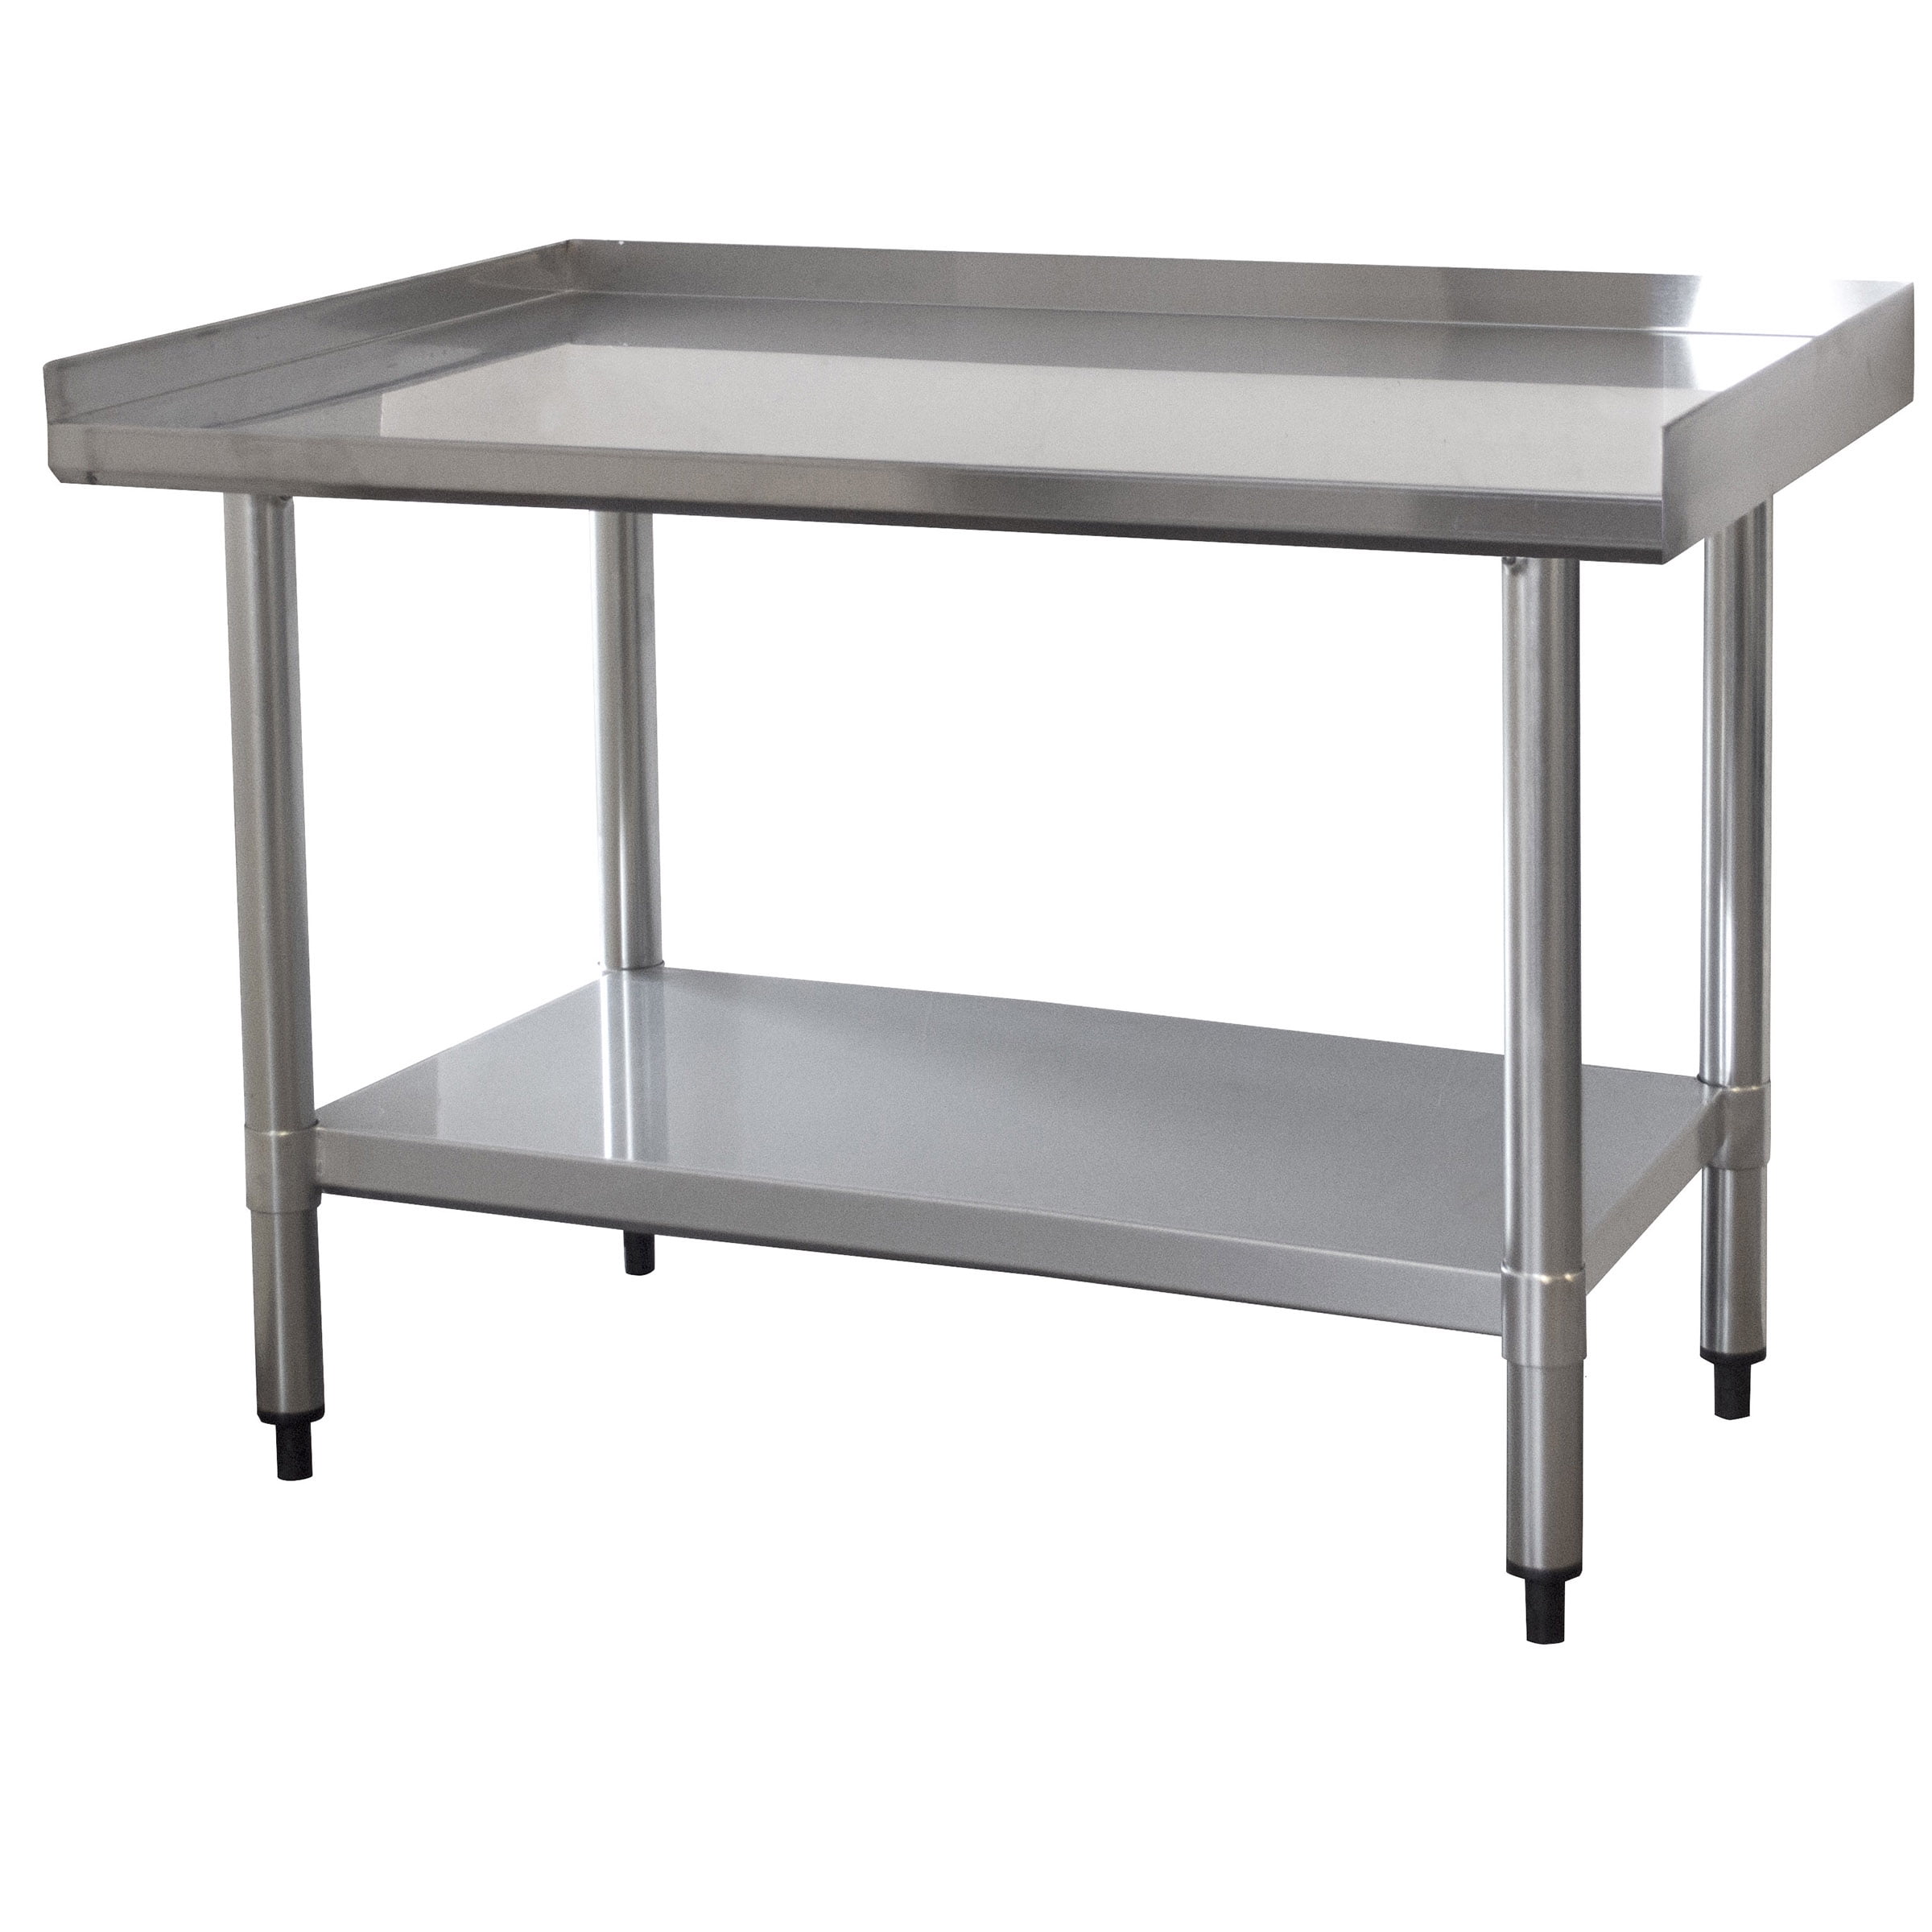 Picture of Sportsman Series SSWT36 24 x 36 in. Upturned Edge Stainless Steel Work Table